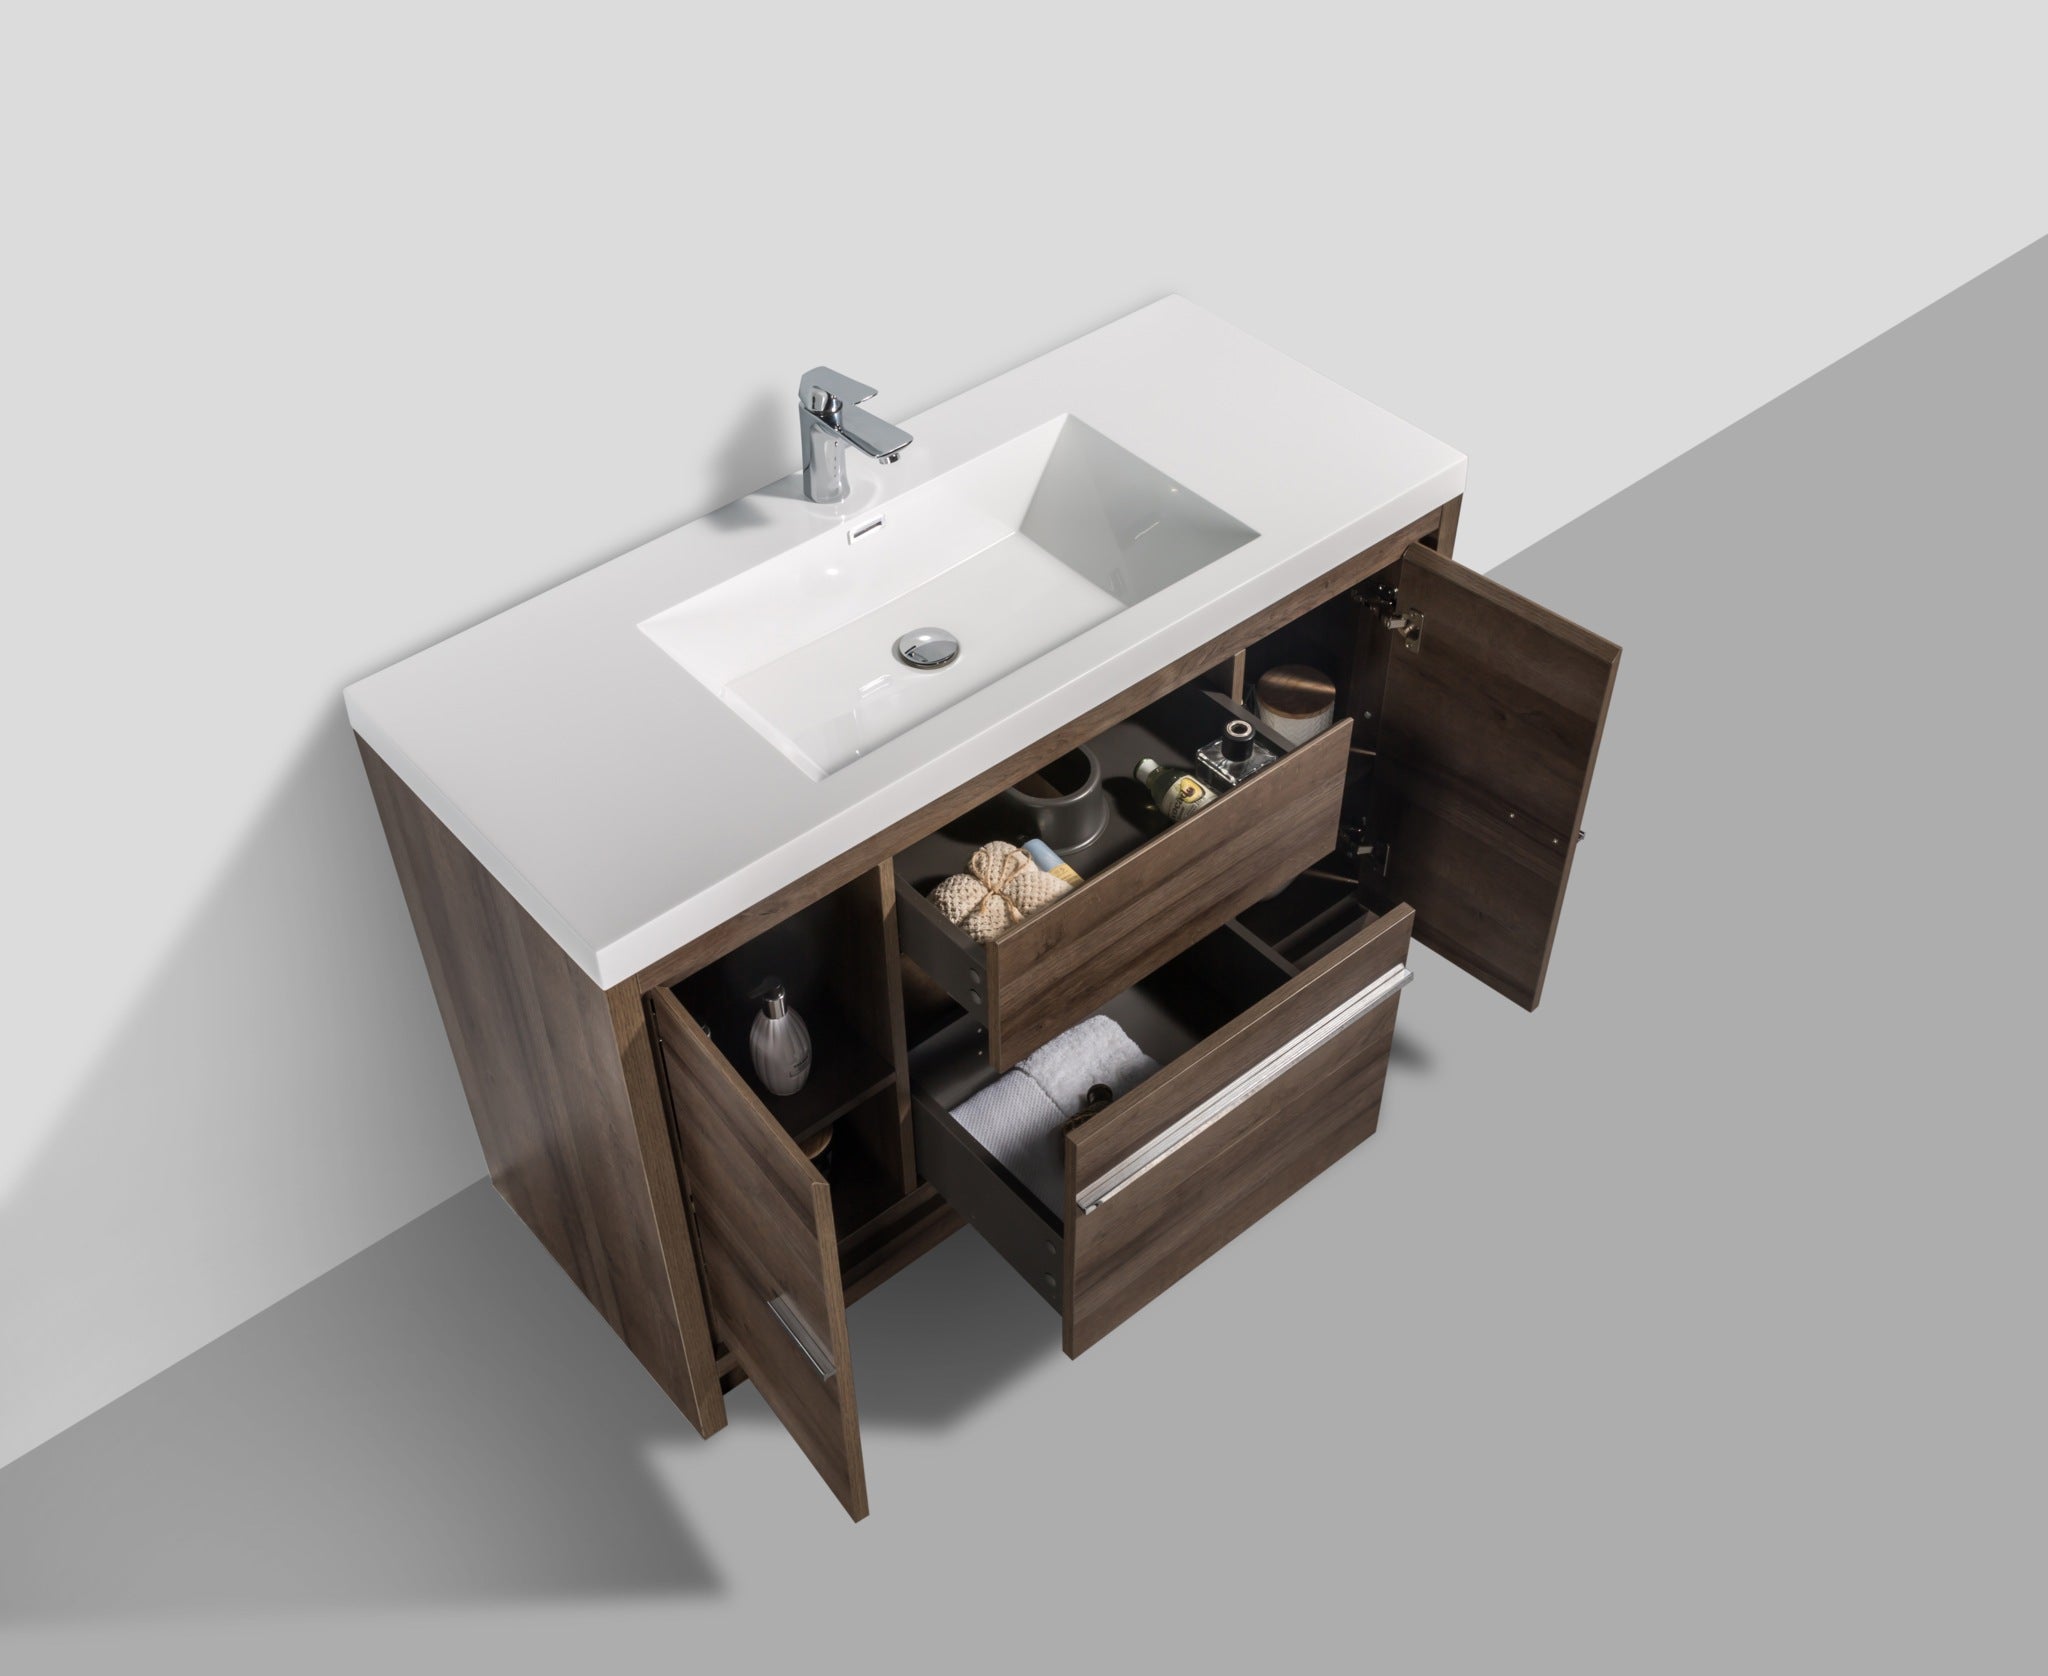 Granada 47.5 Brown Oak With Chrome Handle Cabinet, Square Cultured Marble Sink, Free Standing Modern Vanity Set